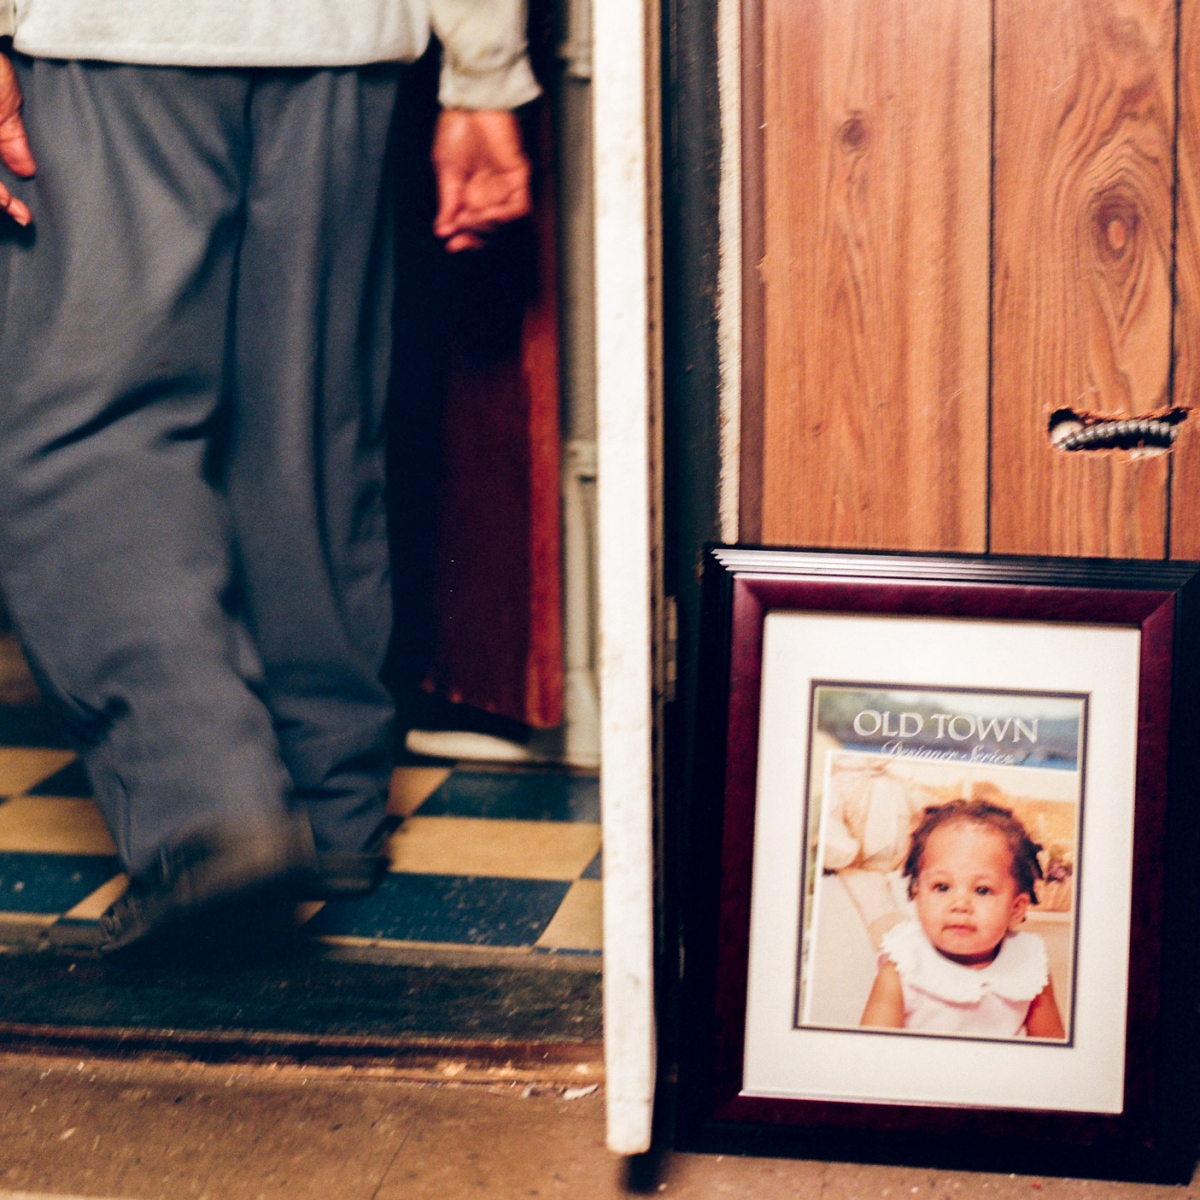 Man's legs in a doorway next to a framed photo of a child